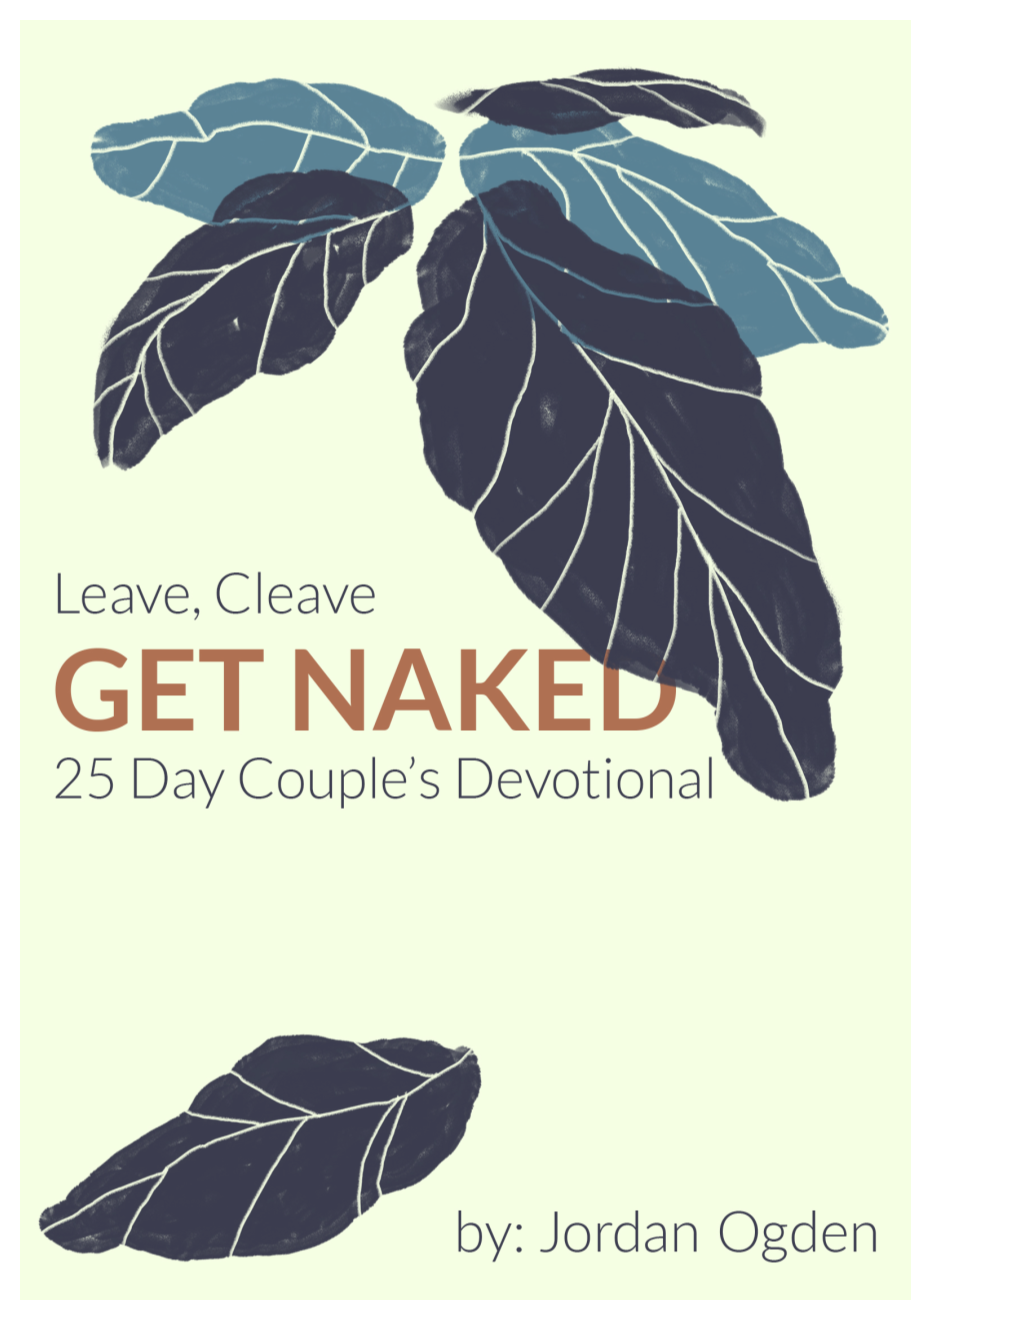 Why 25 Days and Not 31 Or 365, Like Other Couples' Devotionals You